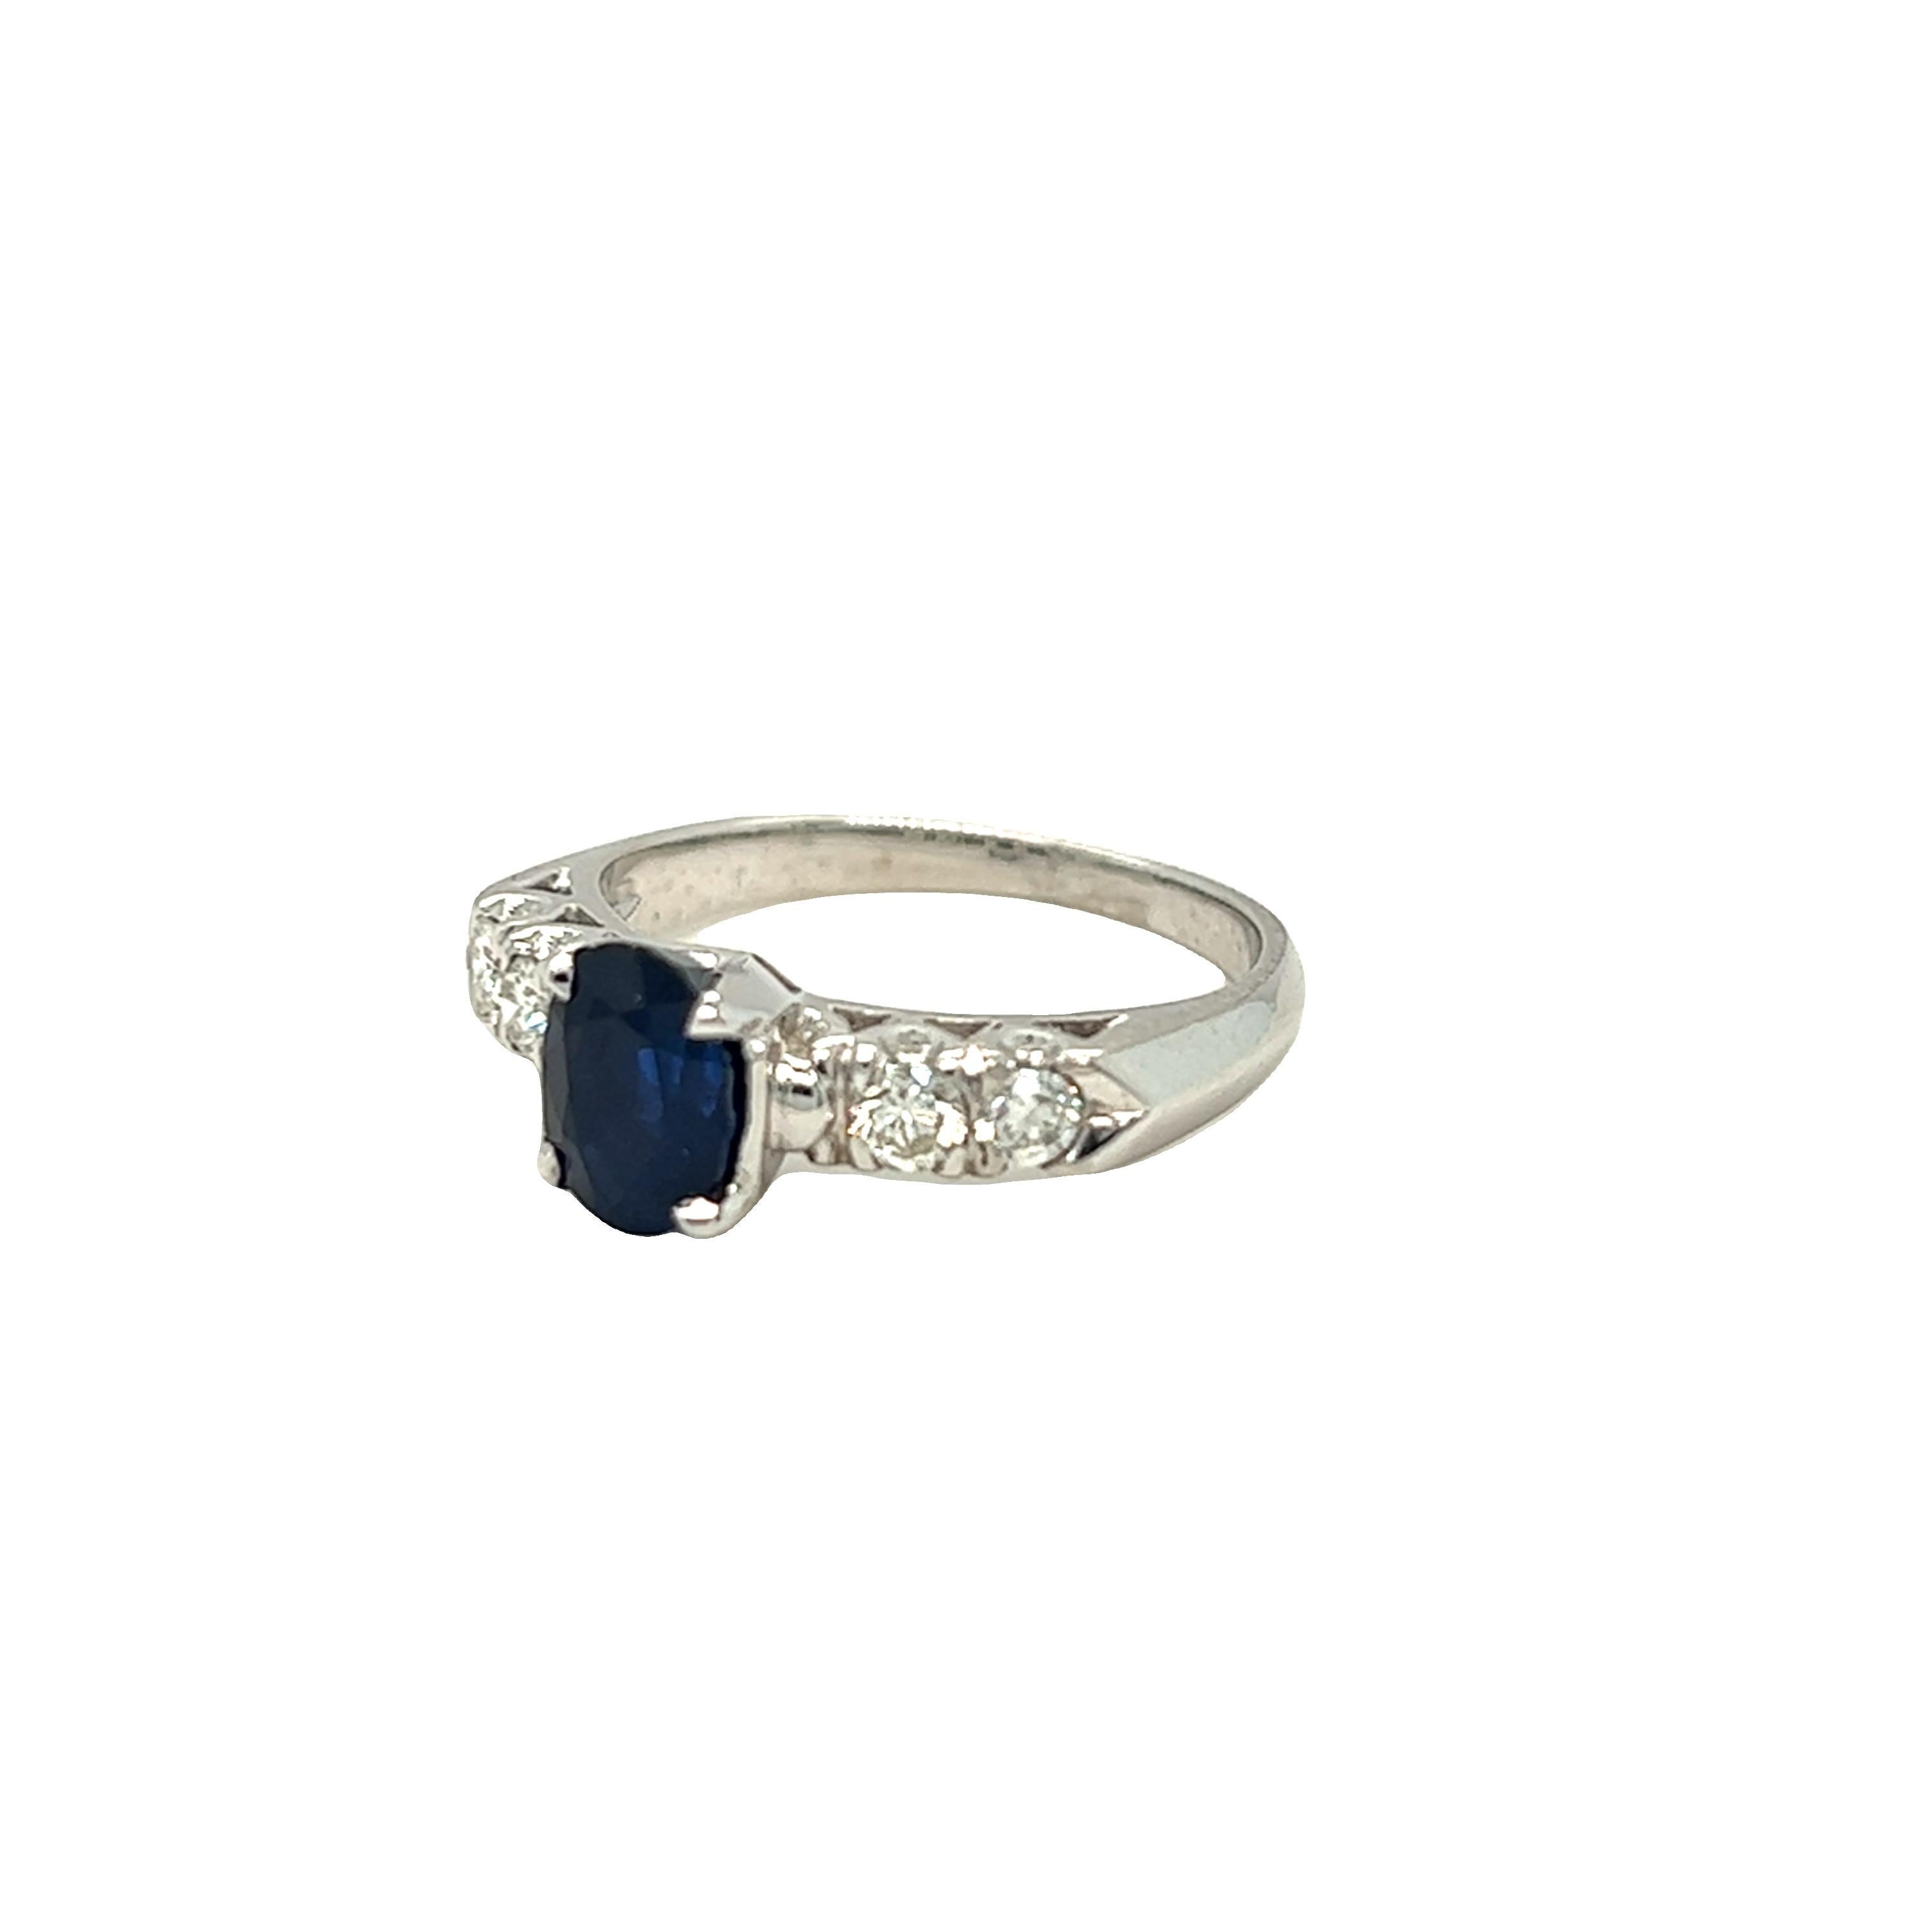 A tailored and very wearable sapphire and diamond ring centering a rich, deep blue 1.66 carat oval sapphire highlighted on either side by two round brilliant diamonds. Mounted in 18k white gold. The ring is currently in a size 6 and may be resized.